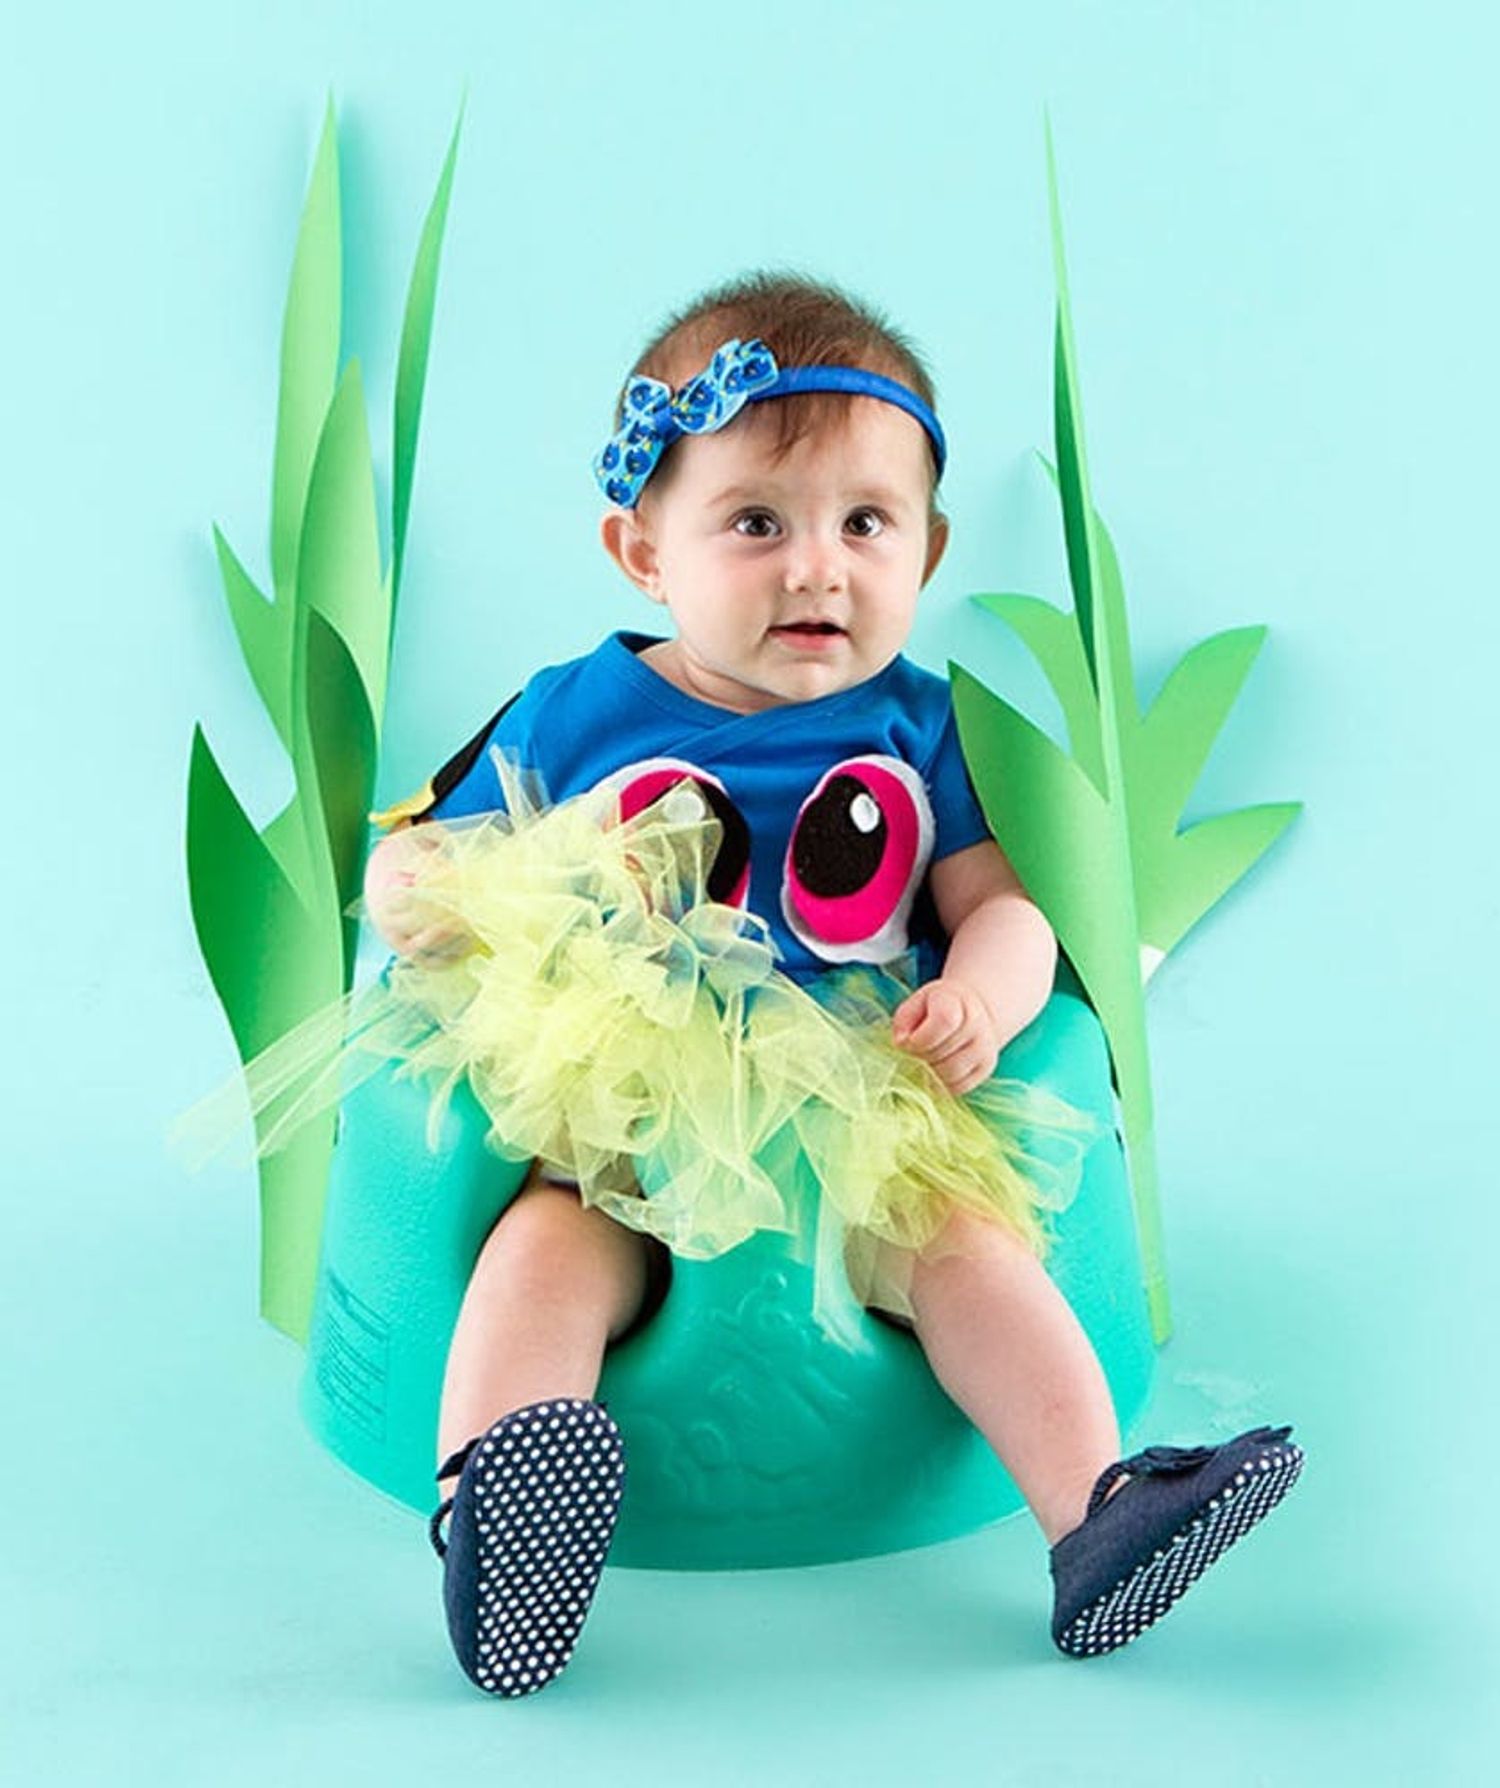 Dress Up Your Little One in This Finding Dory Costume This Halloween ...